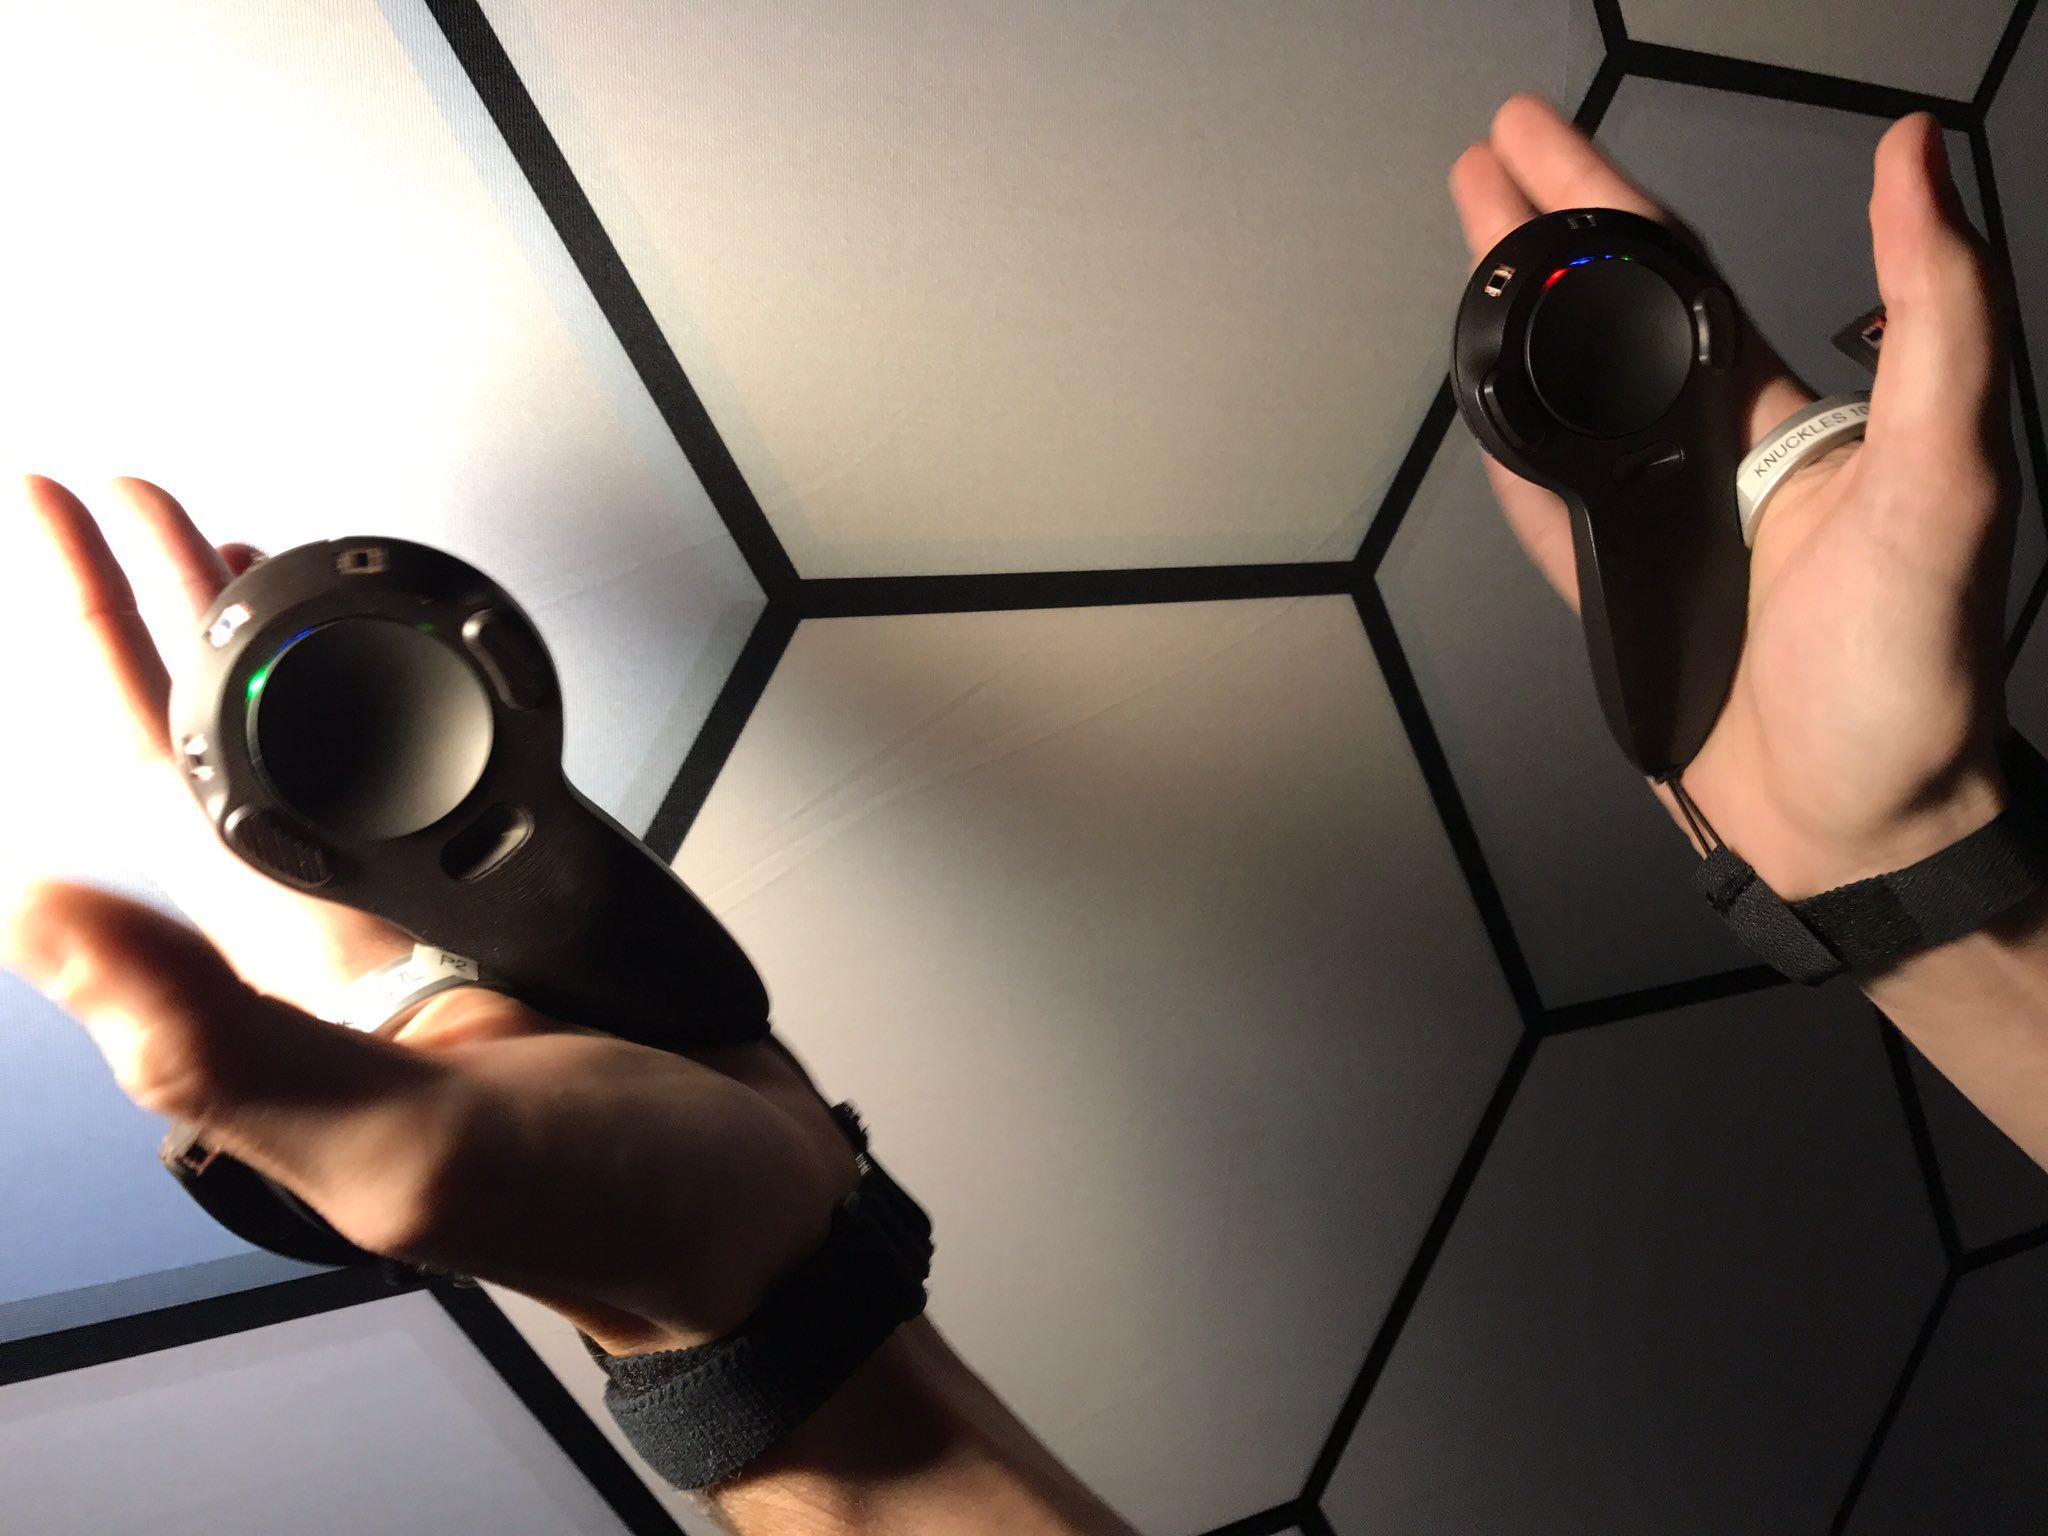 leaked new htc vive controllers take design cues from oculus touch image 1